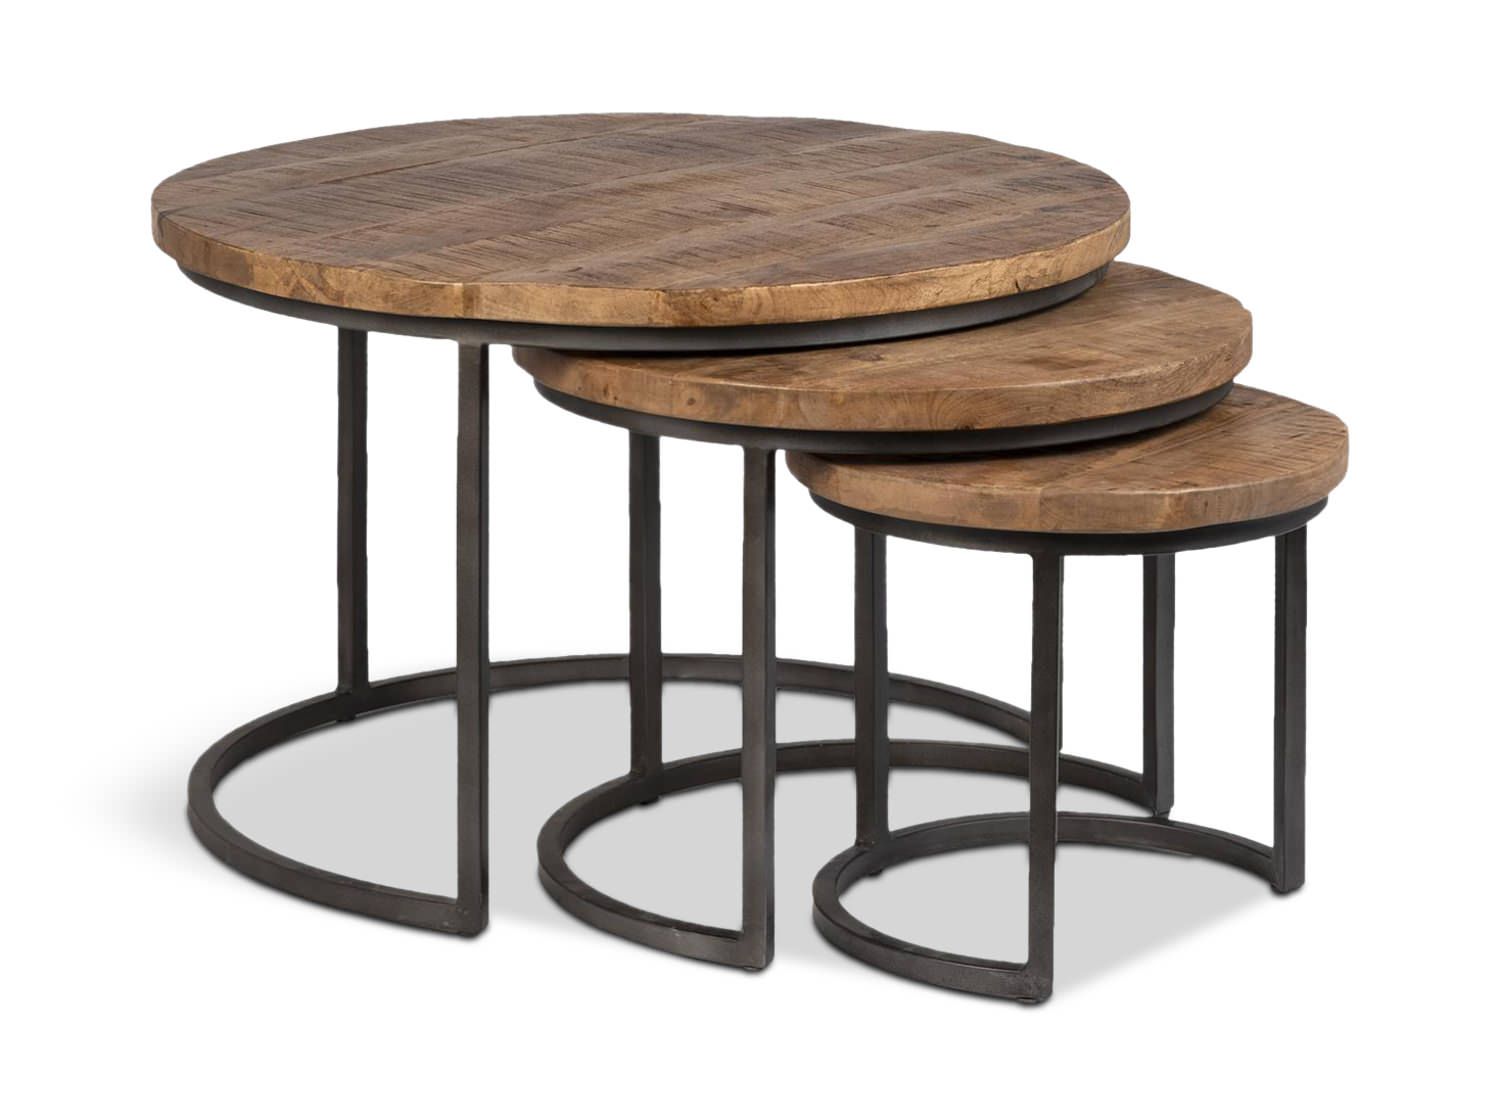 Shelby Nesting Coffee Tables | Hom Furniture In Nesting Coffee Tables (View 11 of 15)